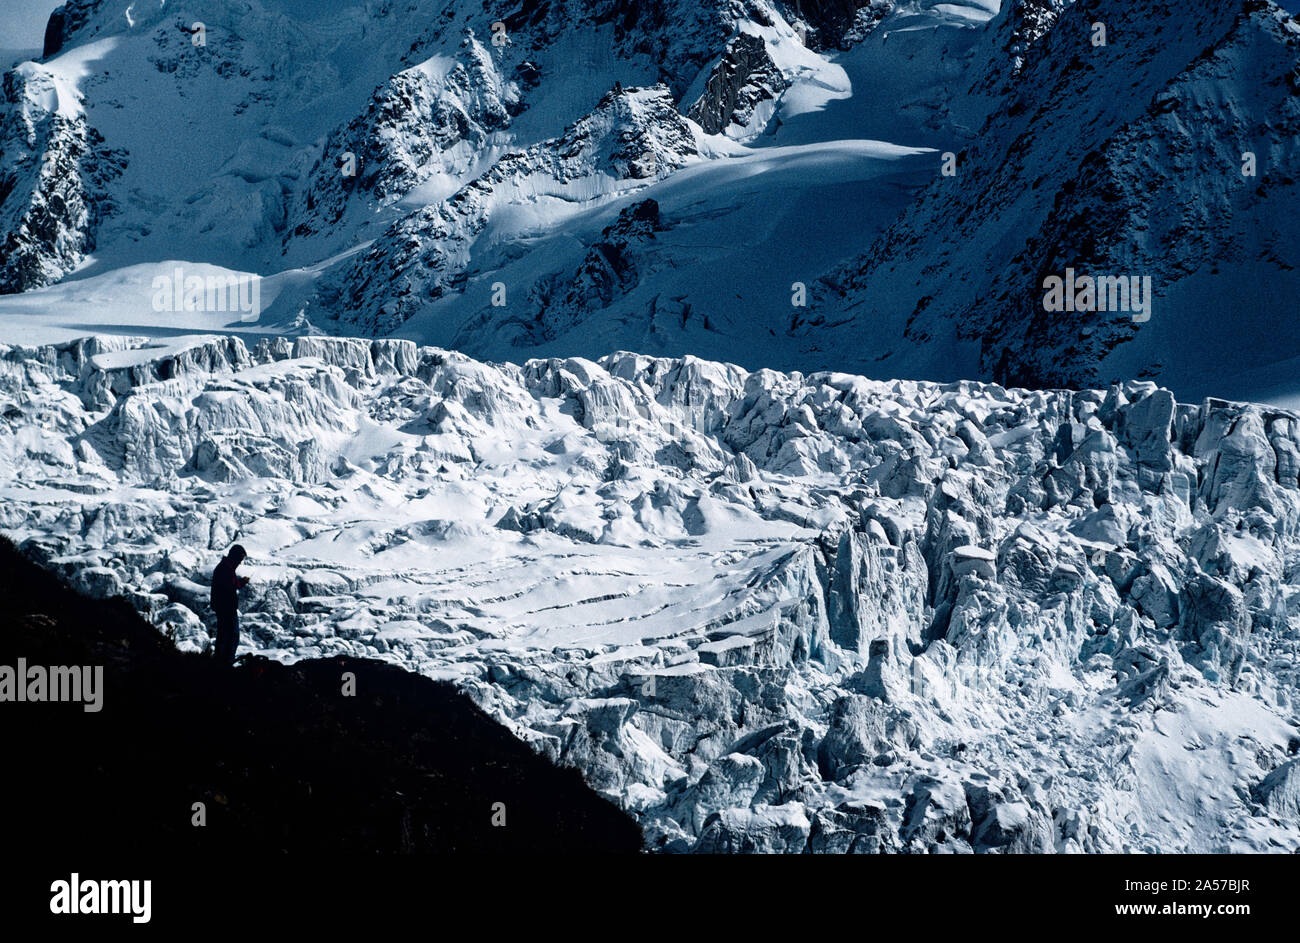 A trekker silhouetted against the icefall of the Le Tour glacier near Chamonix in the French Alps Stock Photo